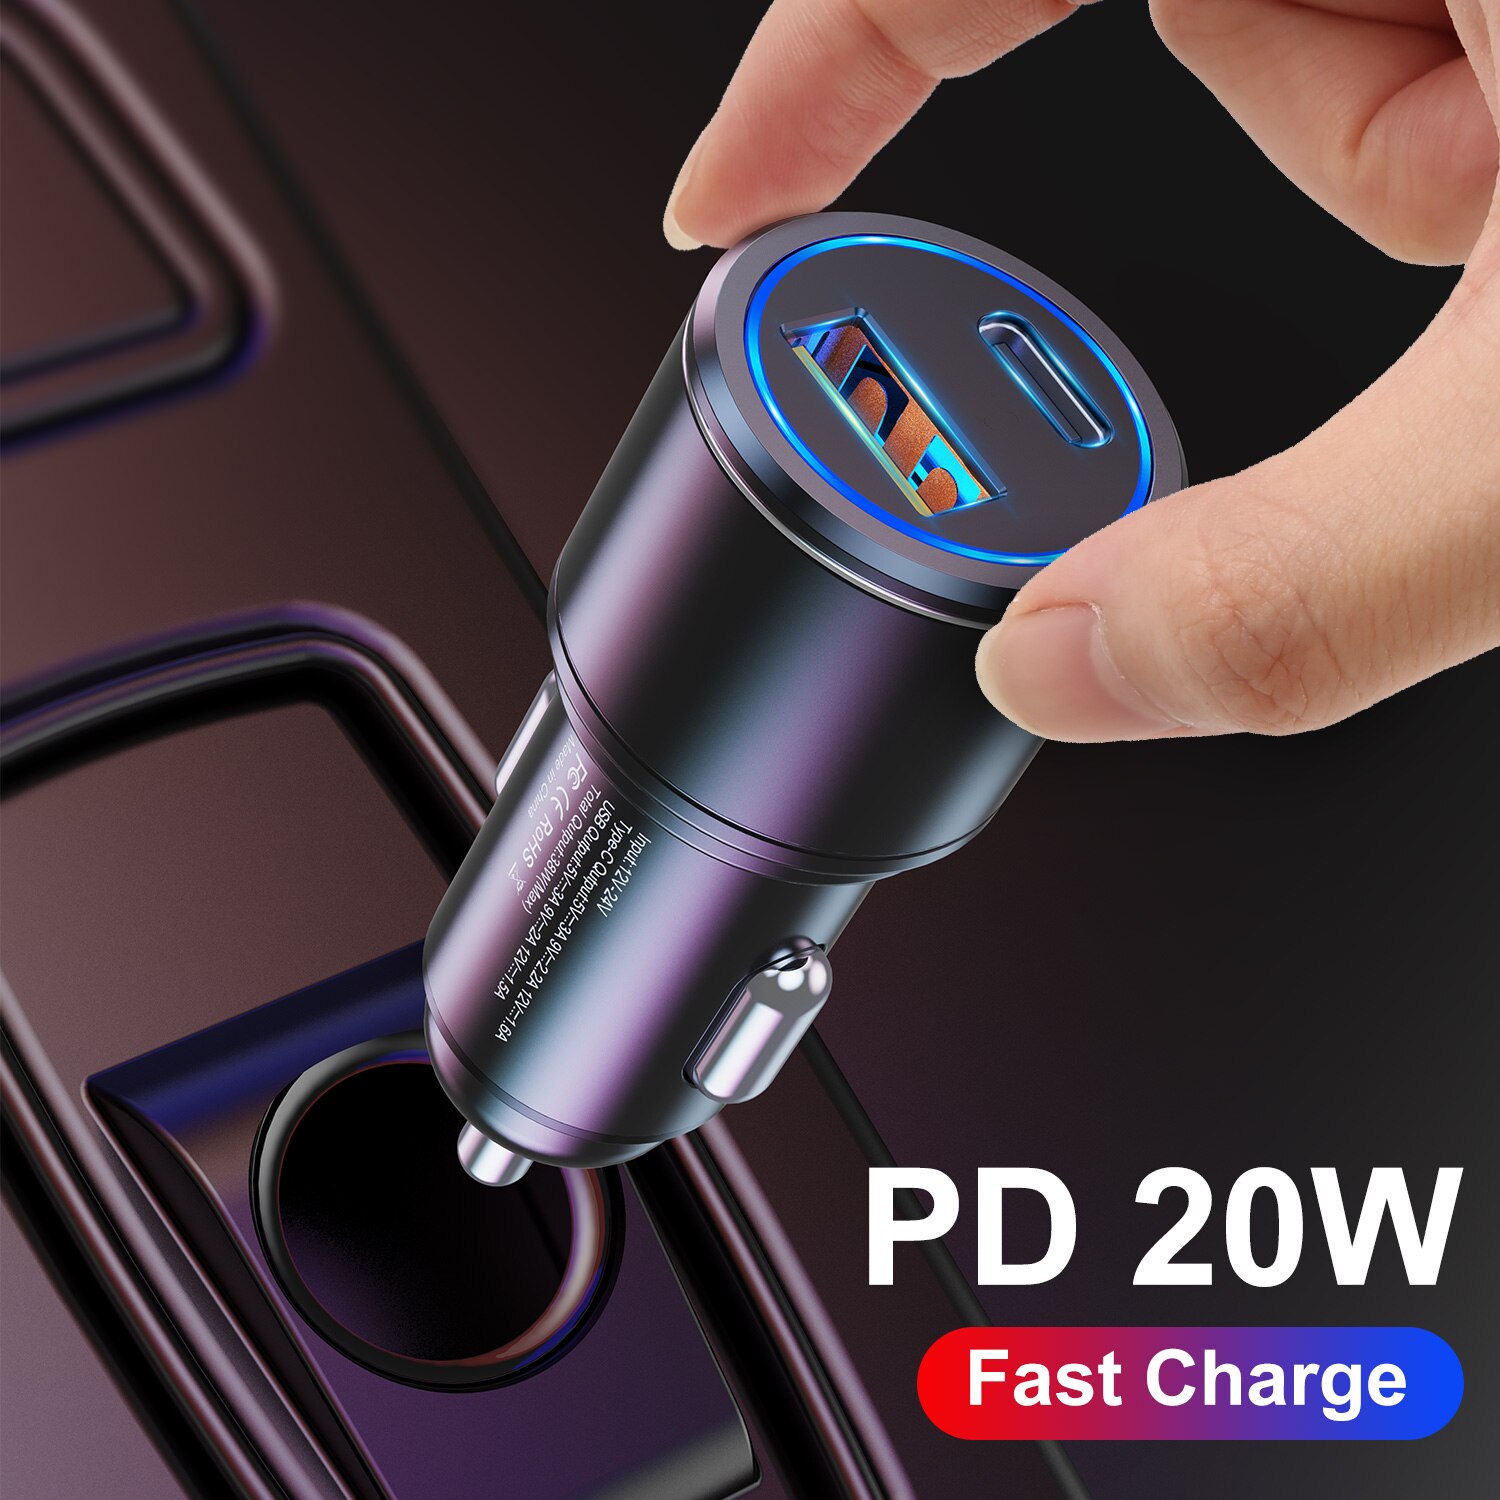 Pd 20W Usb Autolader Quick Charge Auto Type C Qc 3.0 Mobiele Telefoon Oplader Snel Opladen Voor Iphone 13 12 Pro Max 11 Xiaomi